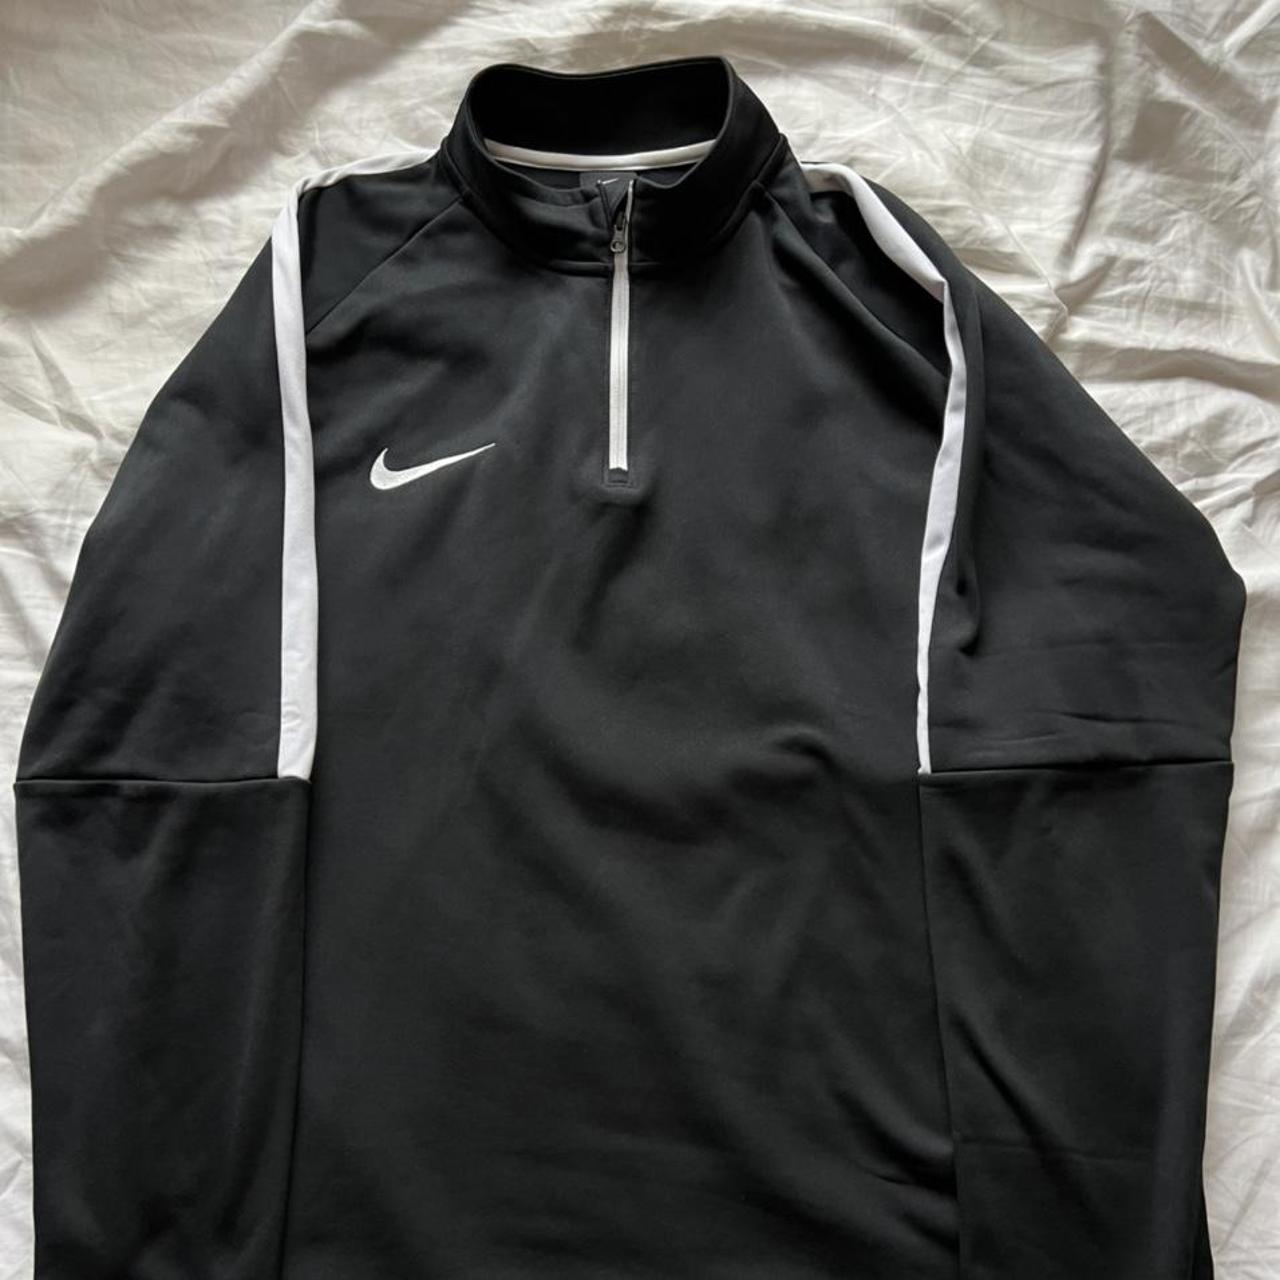 Nike 1/4 Zip drill training top ⚽️ New Message if... - Depop